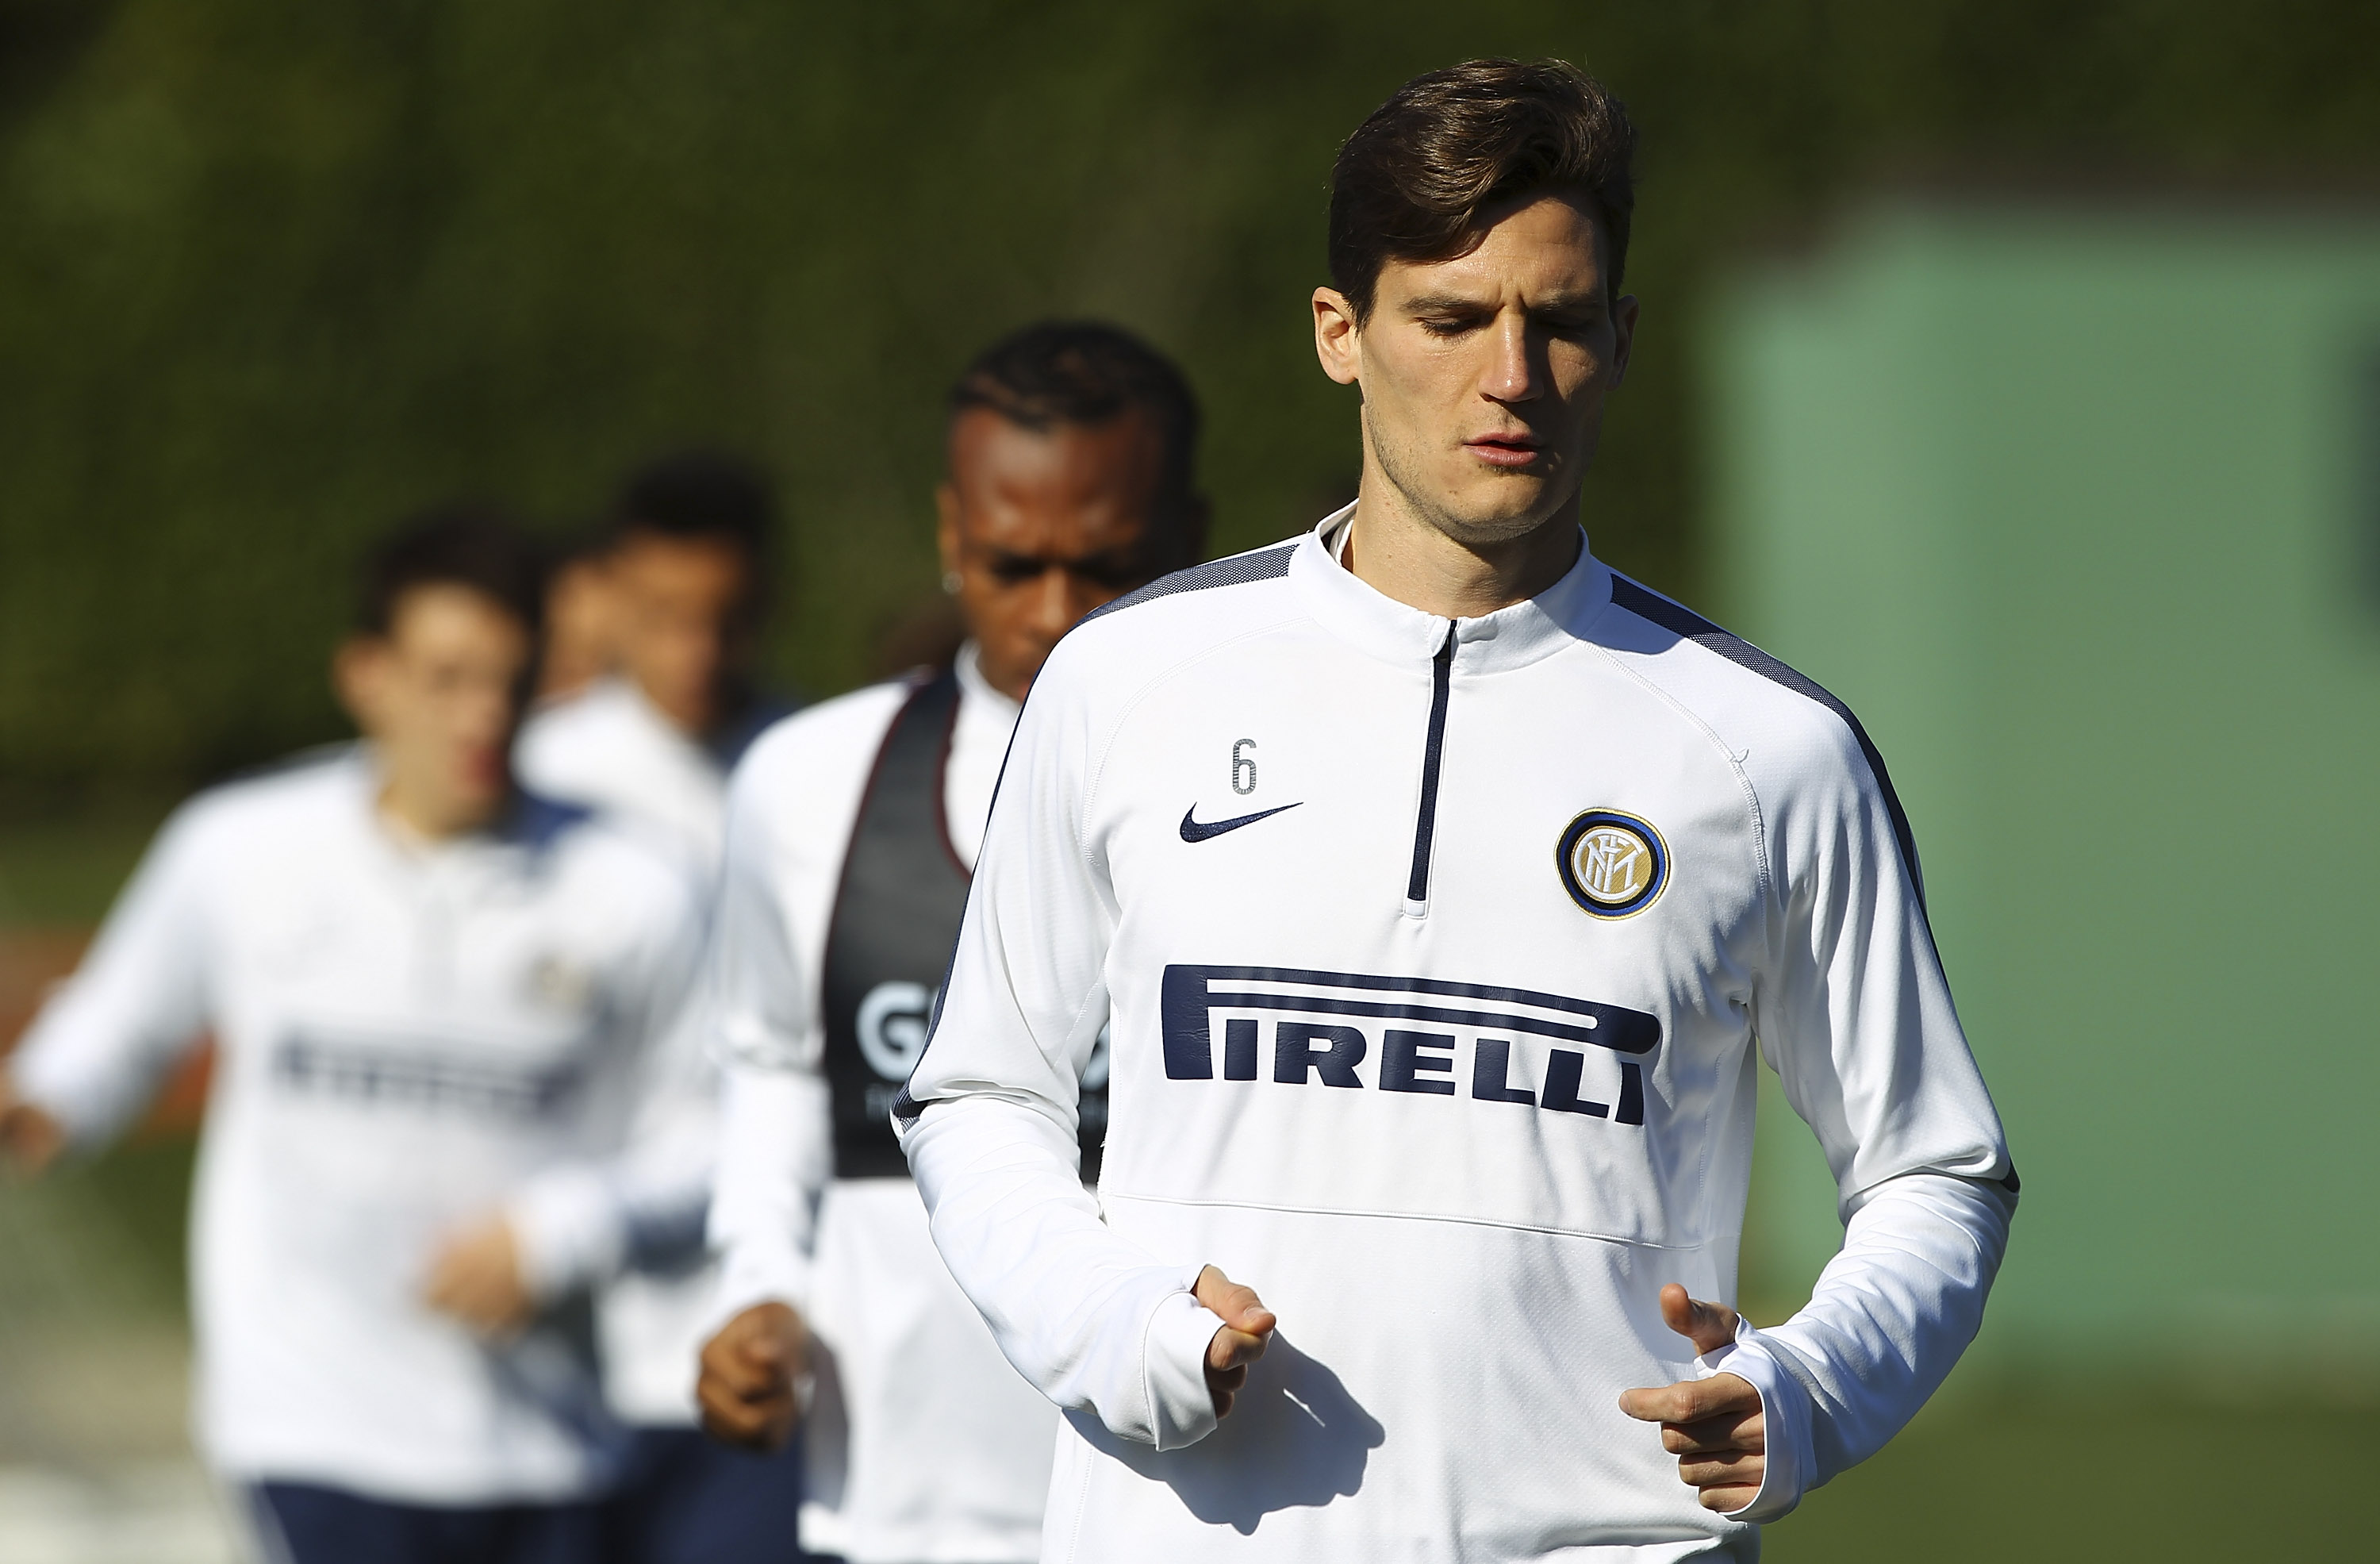 Gazzetta – Andreolli likely to start against Genoa